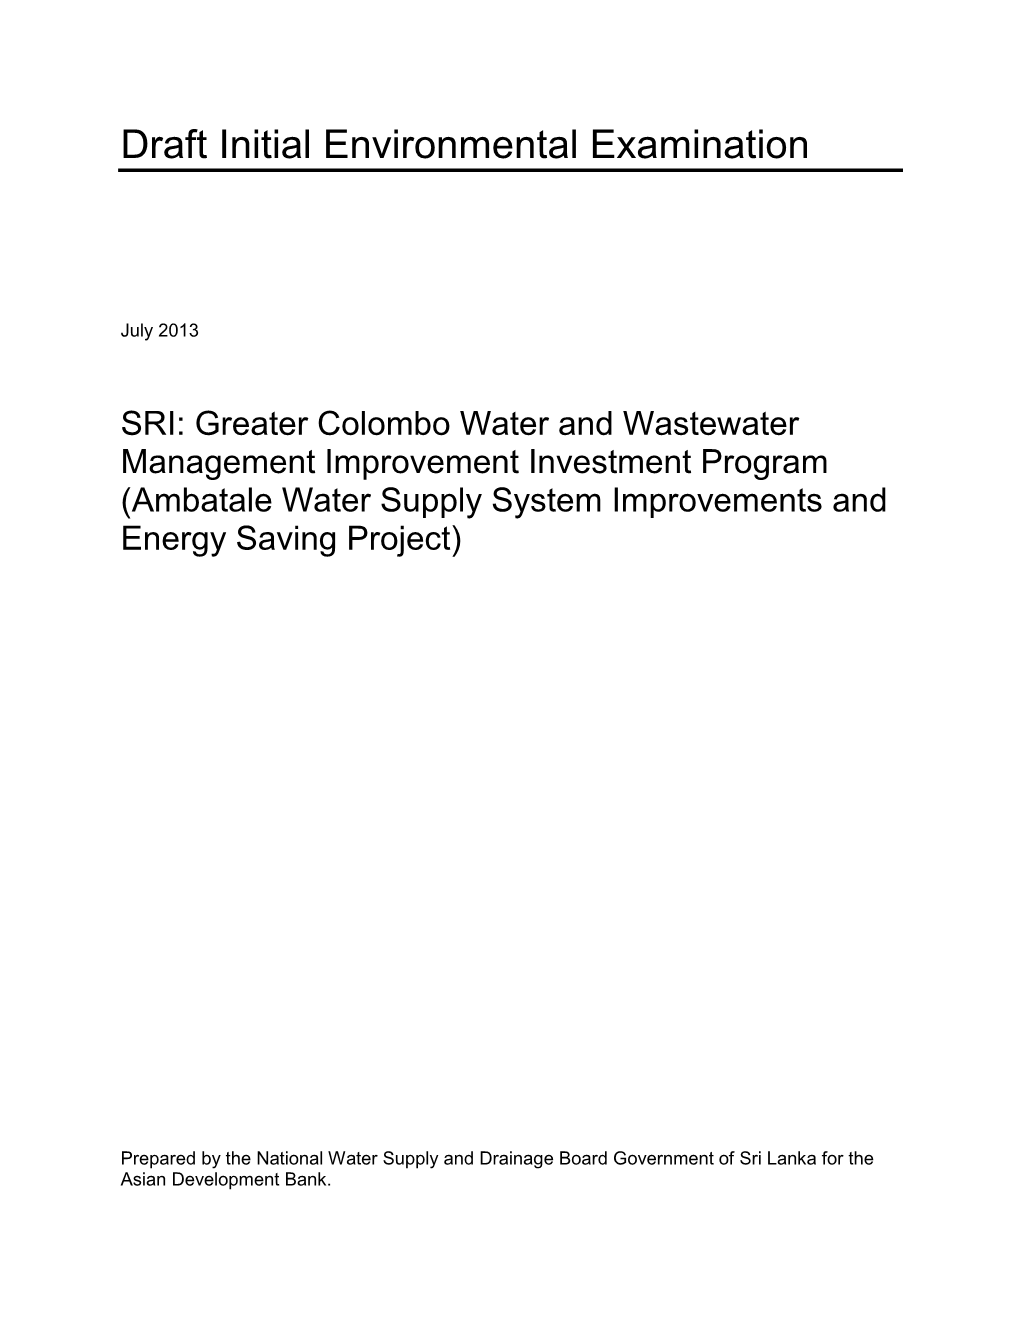 Greater Colombo Water and Wastewater Management Improvement Investment Program (Ambatale Water Supply System Improvements and Energy Saving Project)